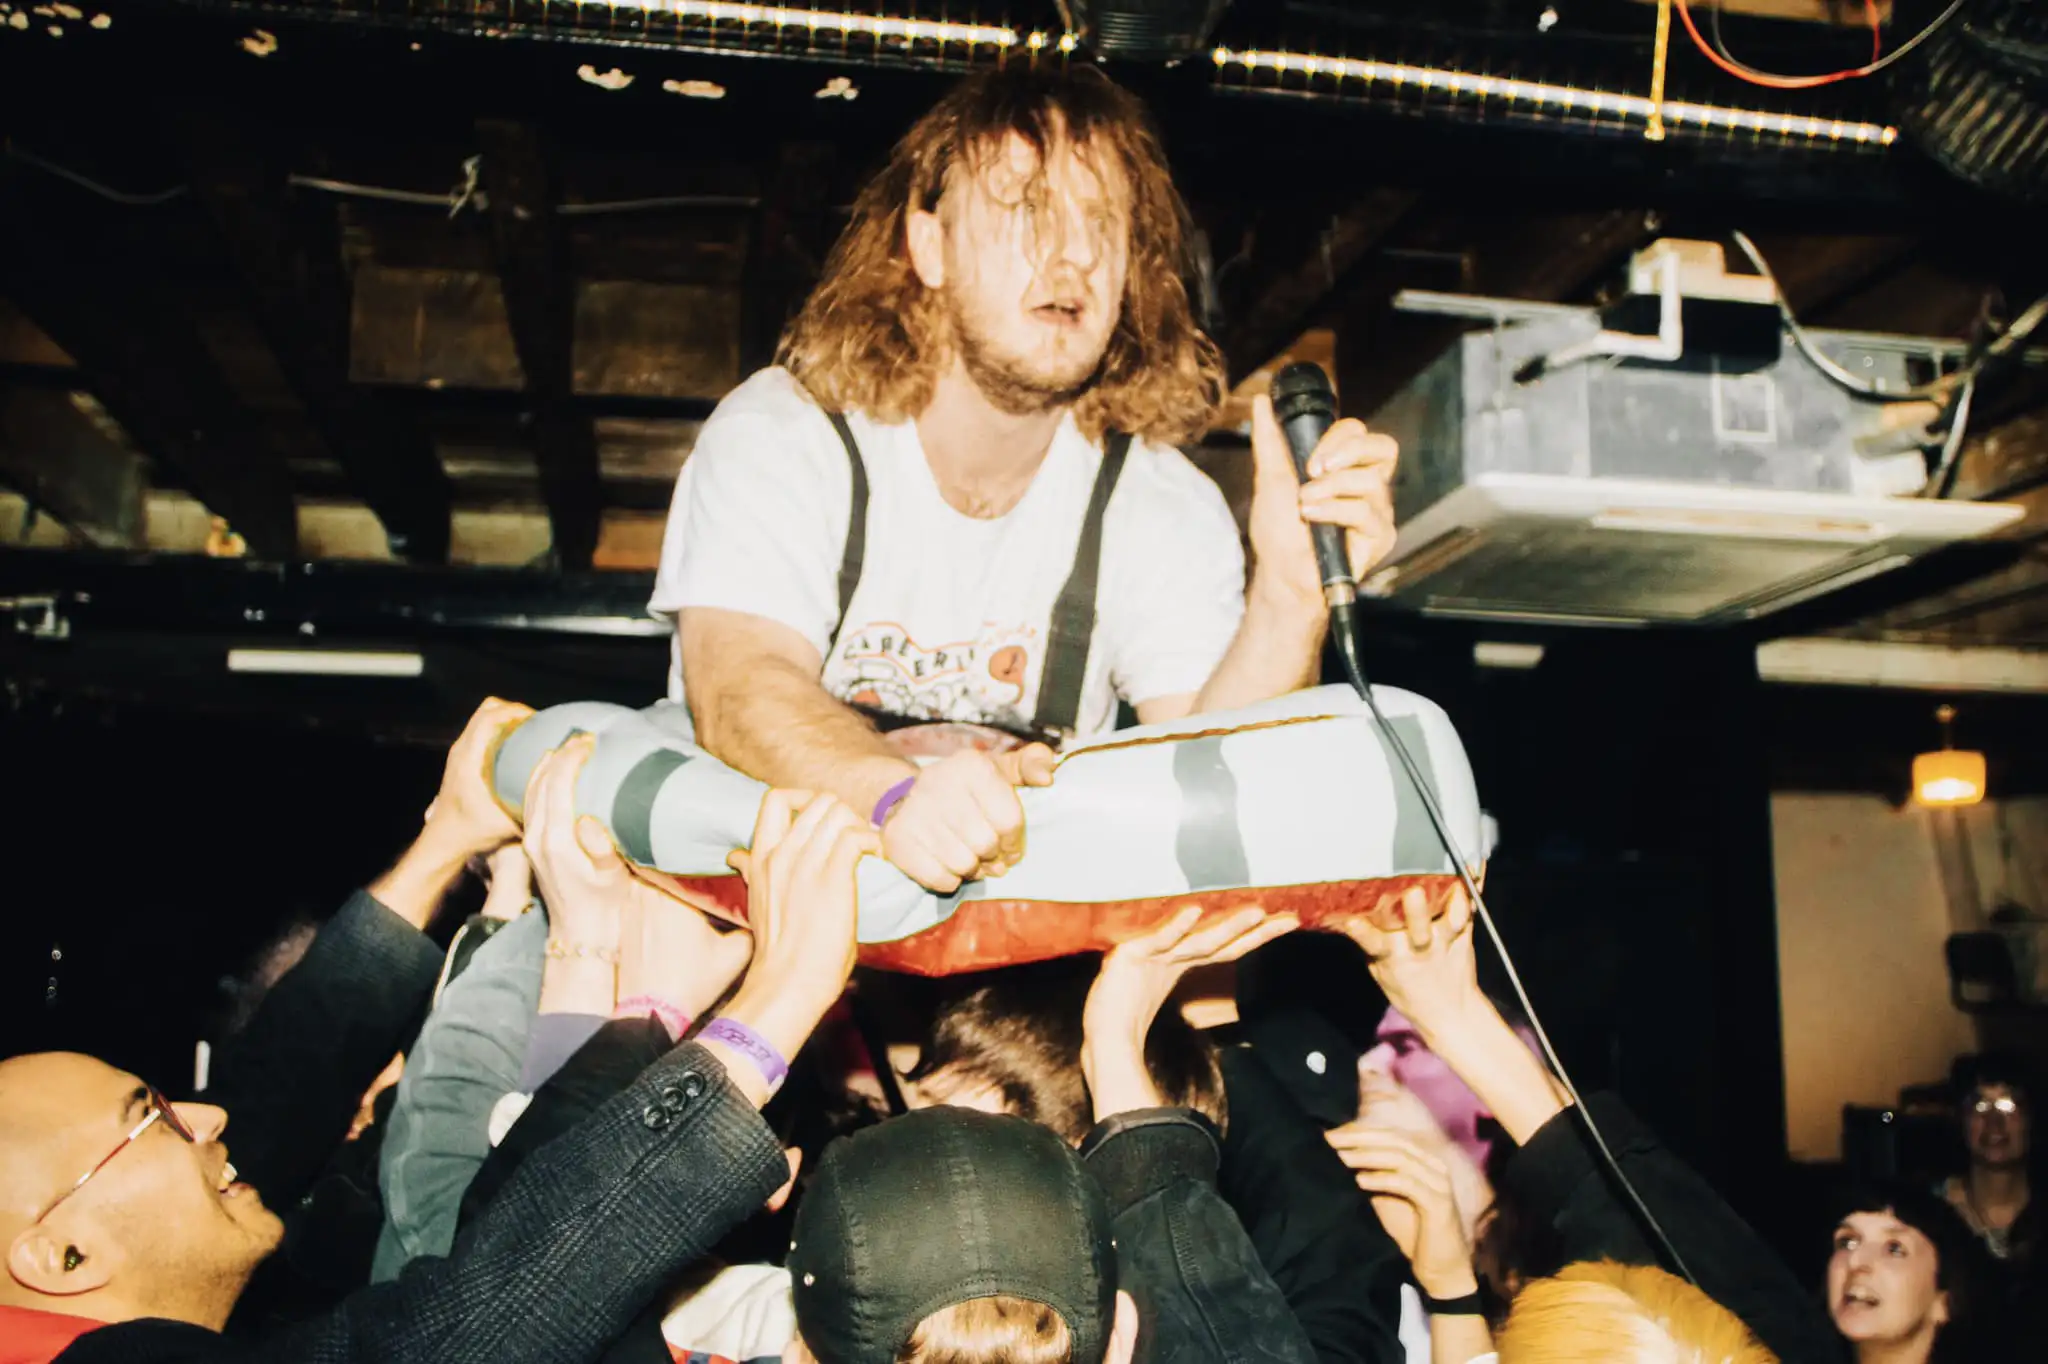 Crowd surfing at Society Of Losers event in Manchester